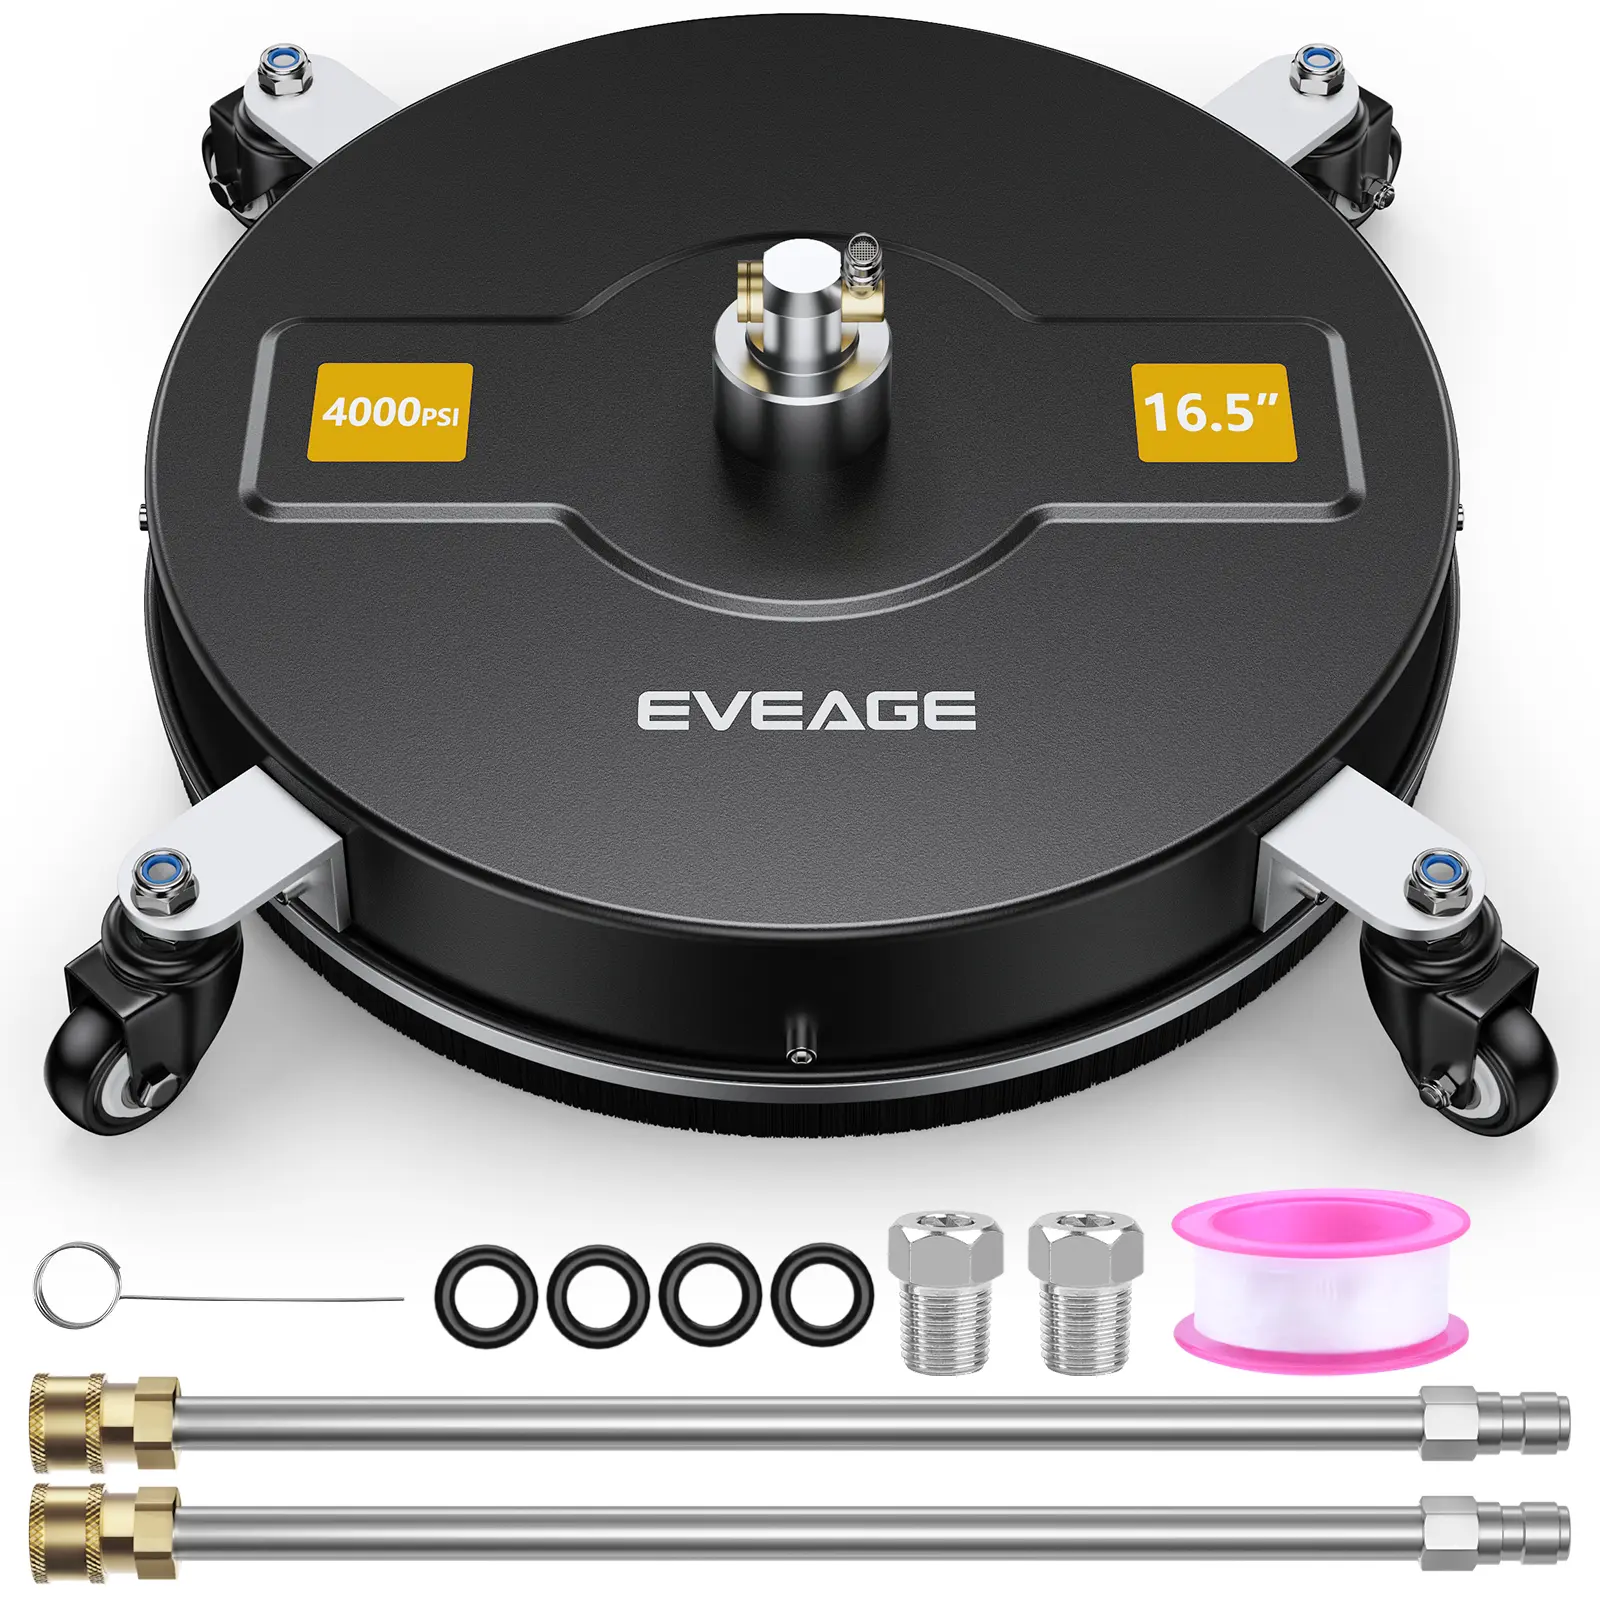 EVEAGE 16.5inch Pressure Washer Surface Cleaner black